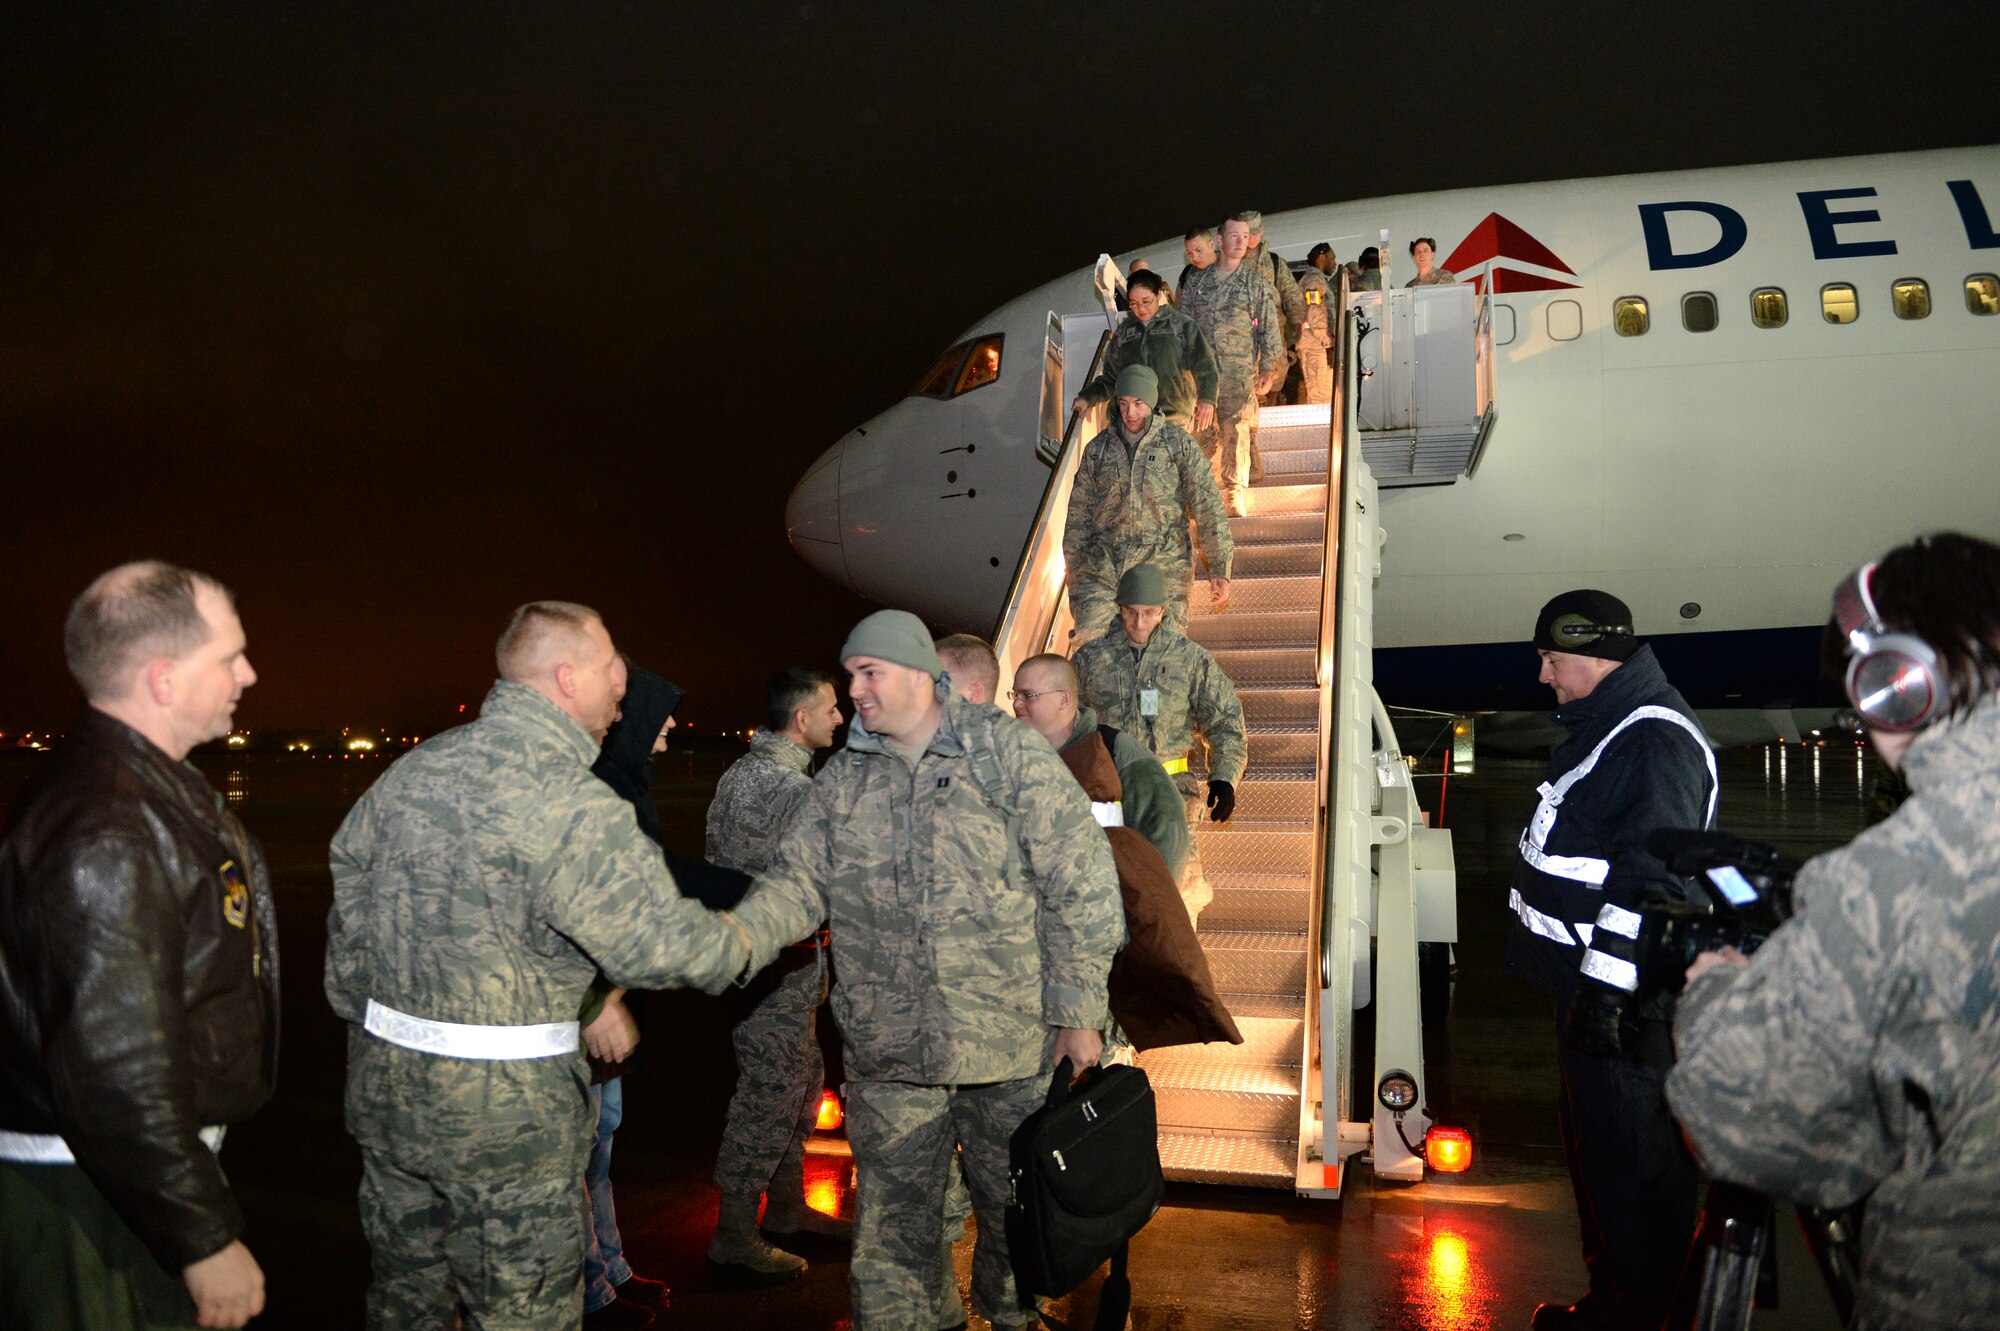 SPANGDAHLEM AIR BASE, Germany – 52nd Fighter Wing leadership greets 606th Air Control Squadron Airmen as they return from a deployment to Southwest Asia Jan. 15, 2014. The 606th ACS is a self-sustaining squadron consisting of maintenance, supply and approximately 19 other specialties. (U.S. Air Force photo by Senior Airman Alexis Siekert/Released)